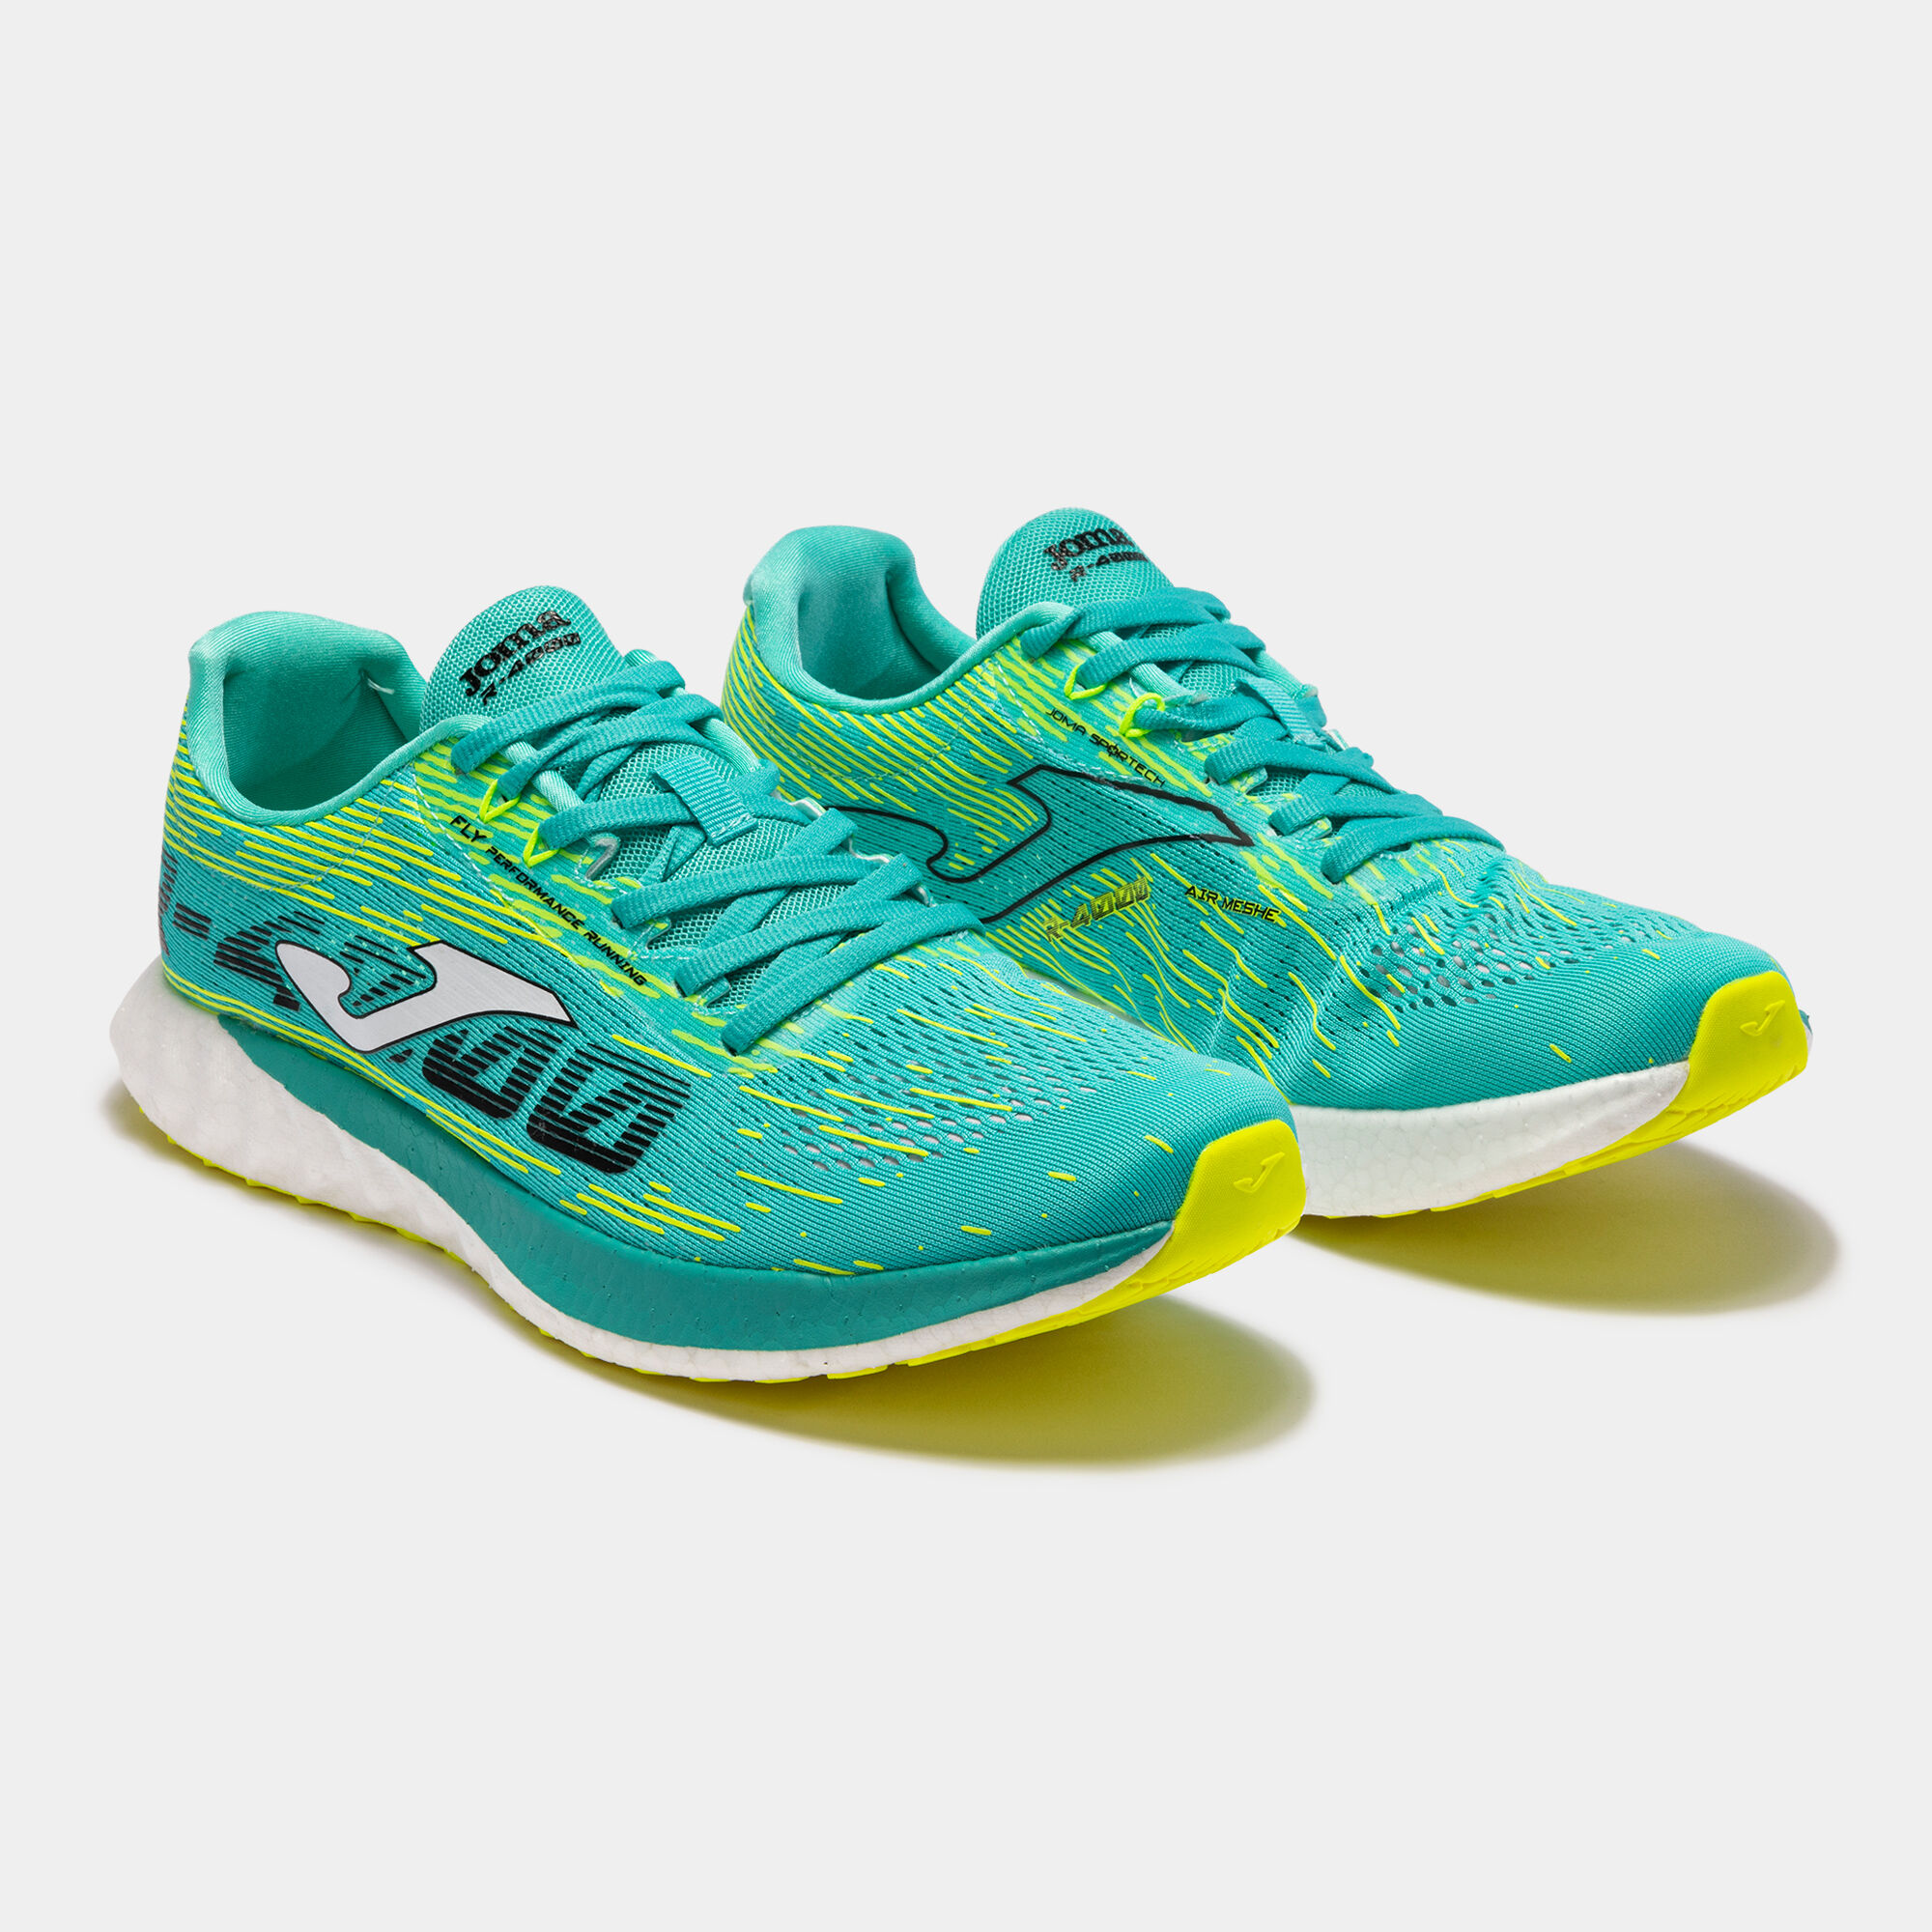 RUNNING SHOES R.4000 23 MAN TURQUOISE